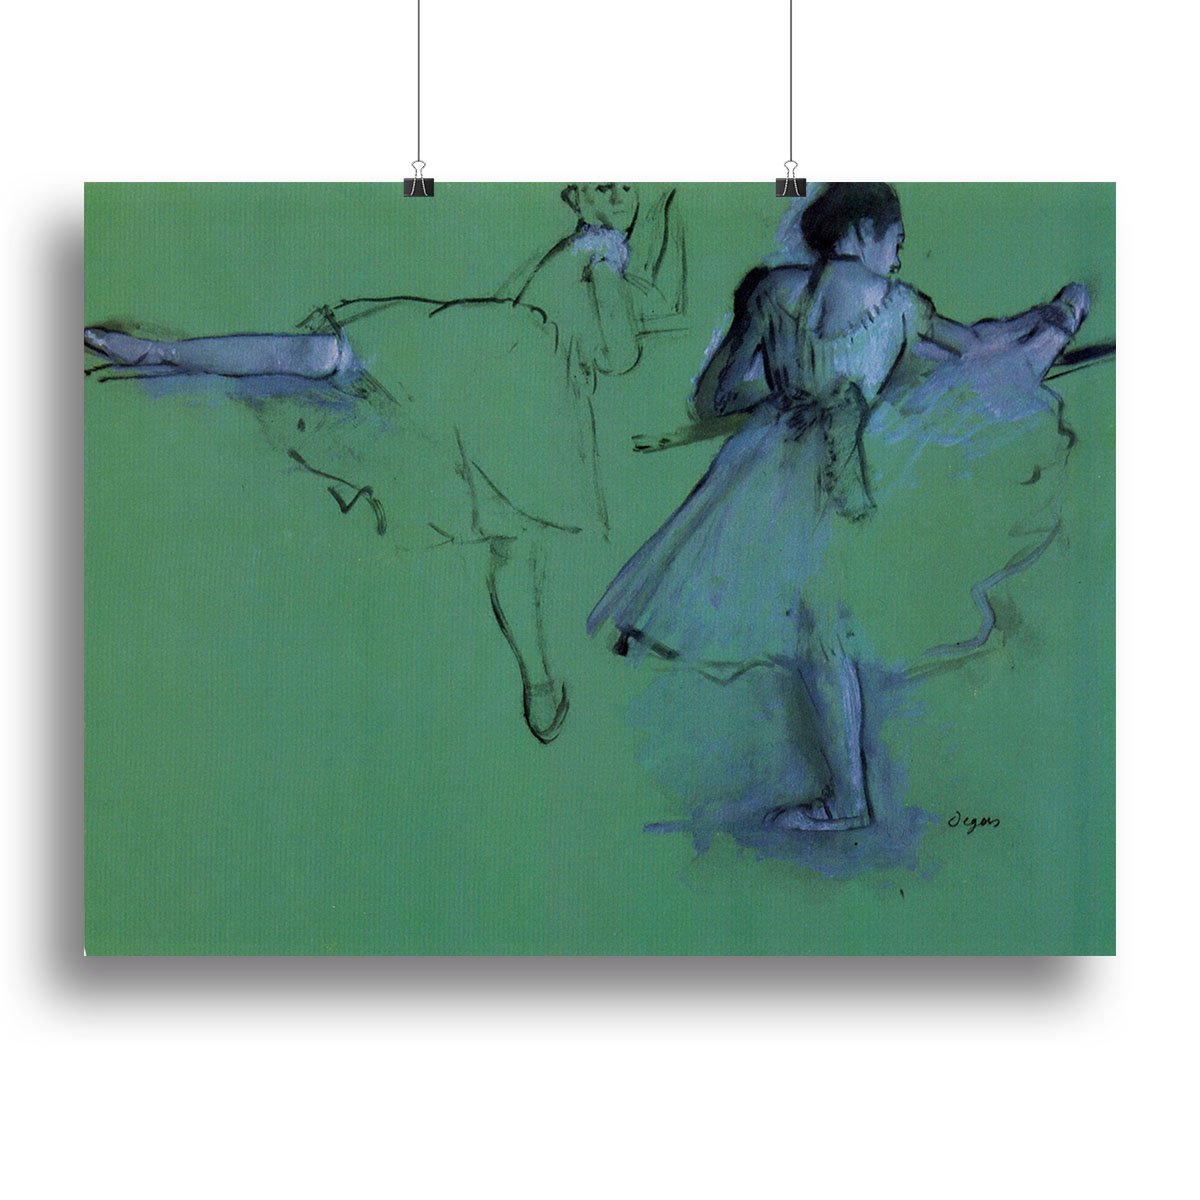 Dancers at the bar 2 by Degas Canvas Print or Poster